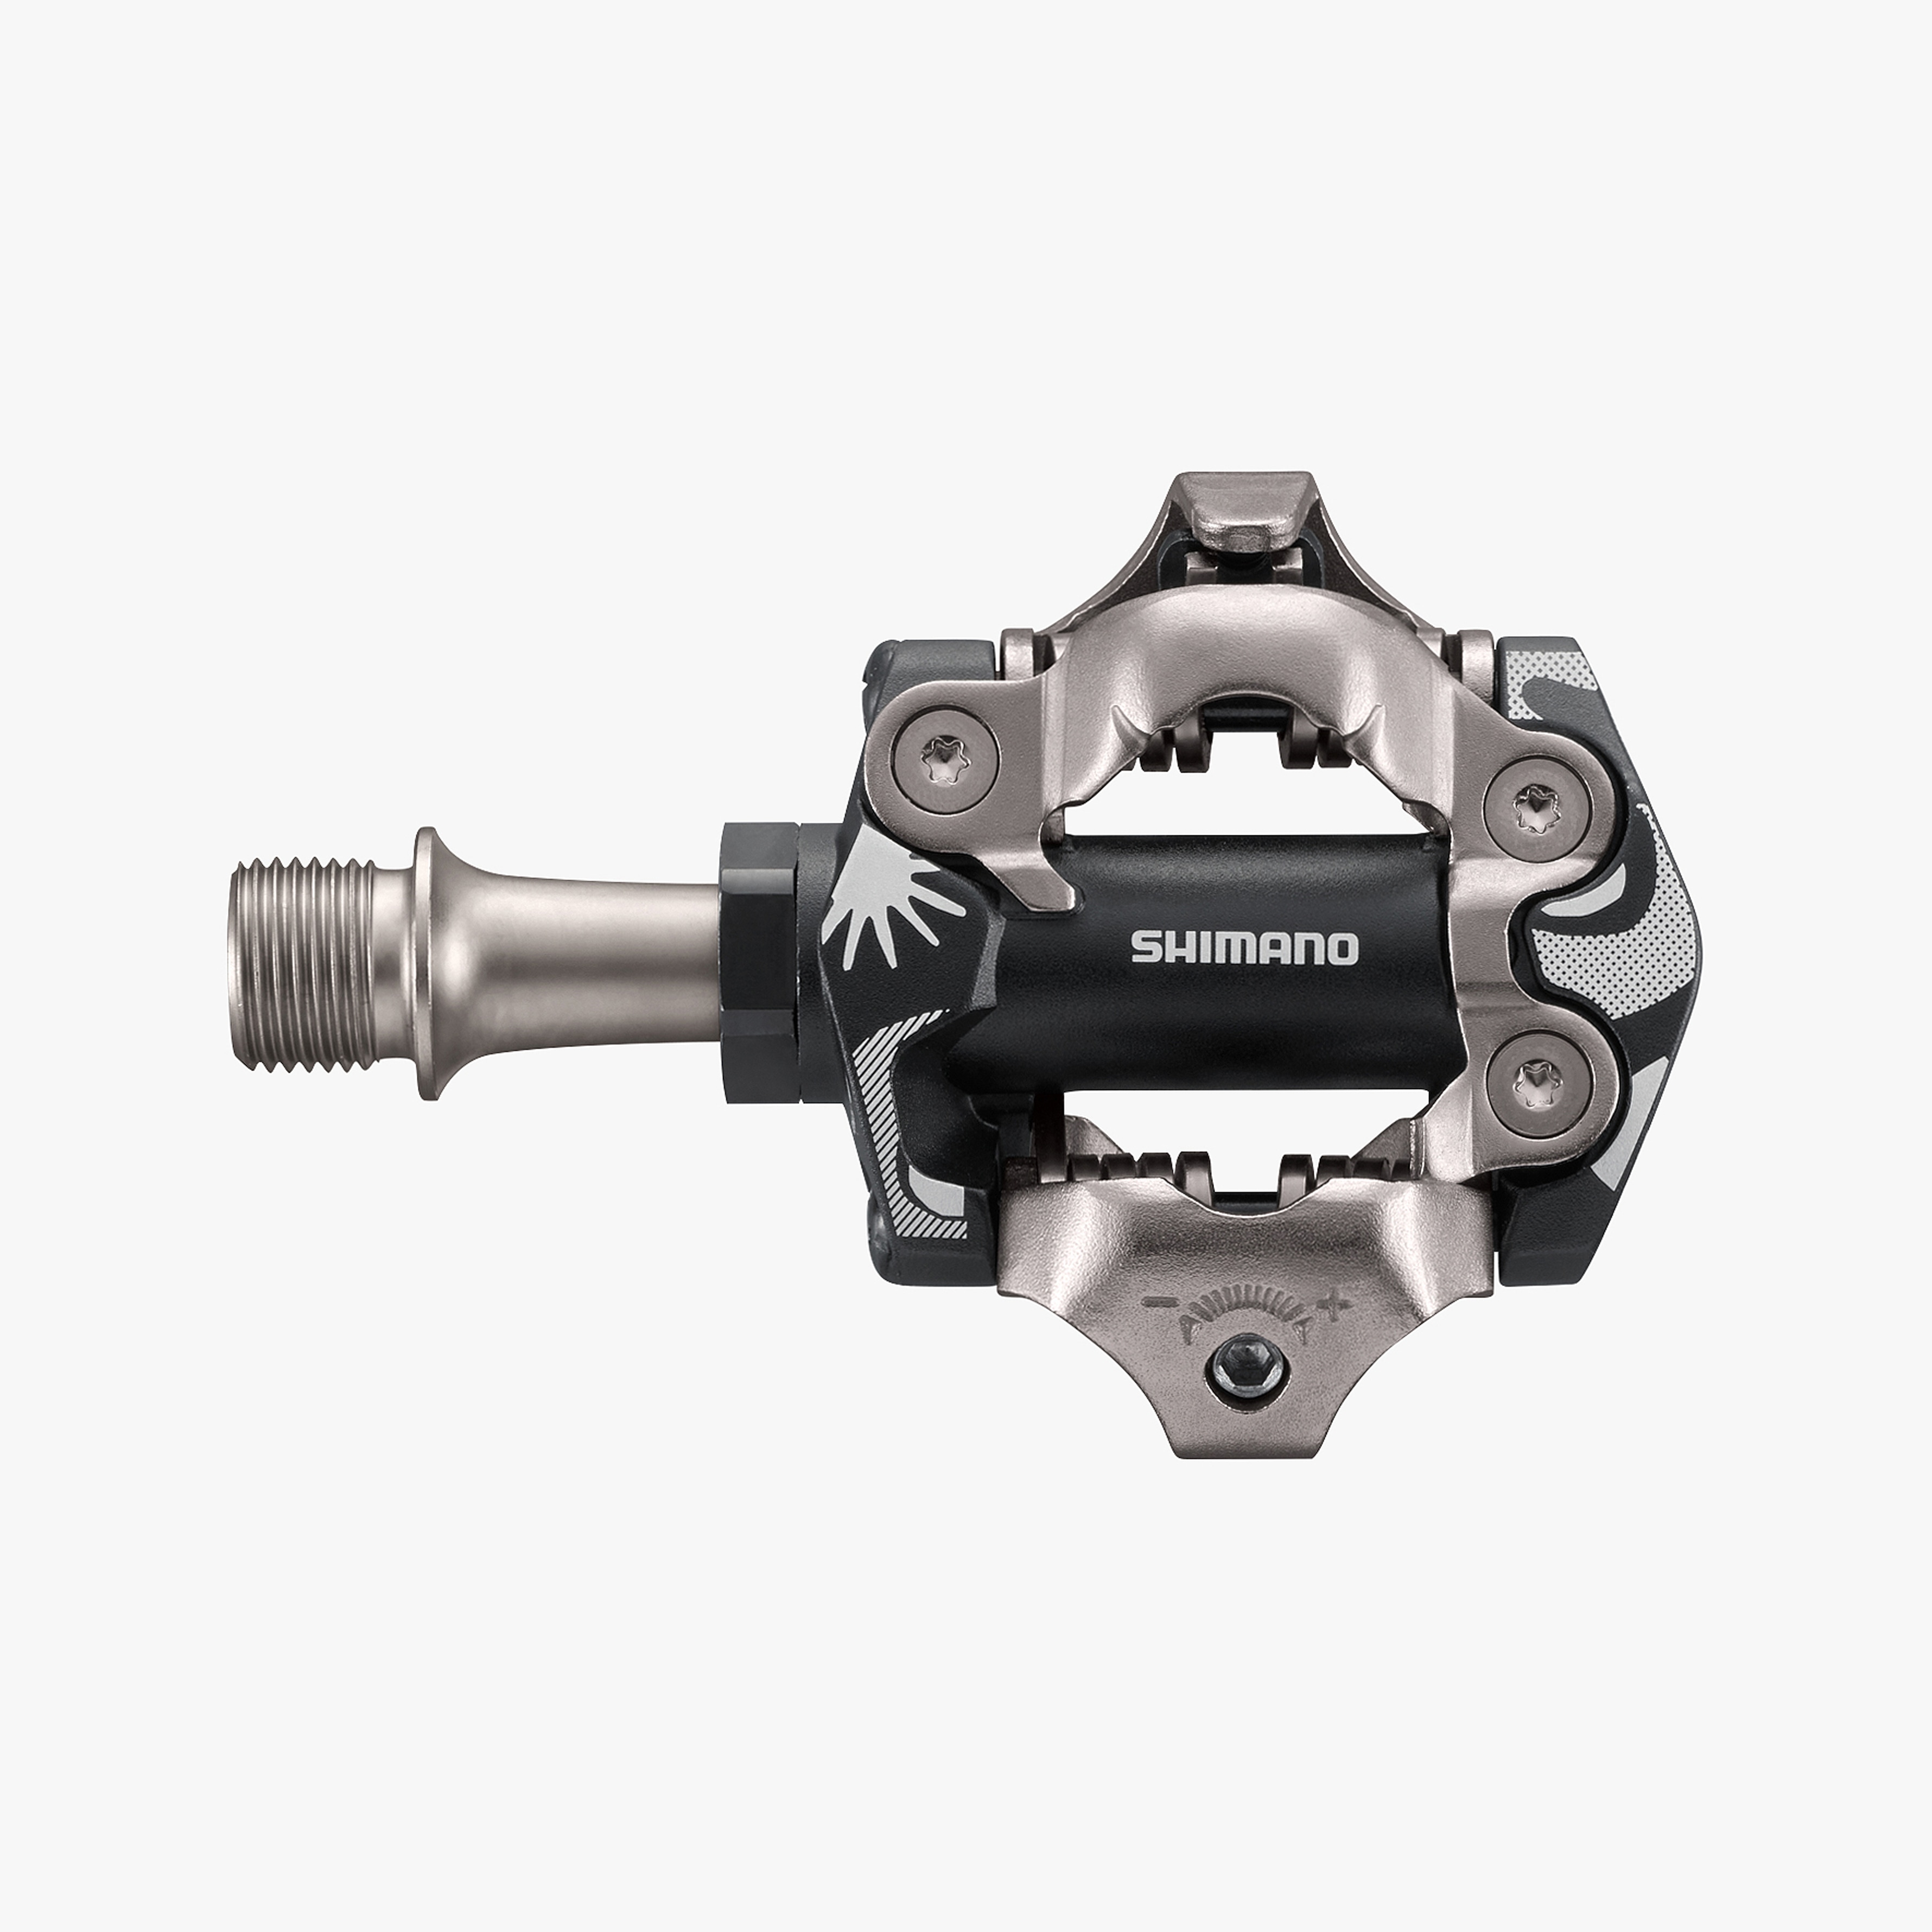 Shimano PD-M8100-UG United in Gravel SPD bike pedals 